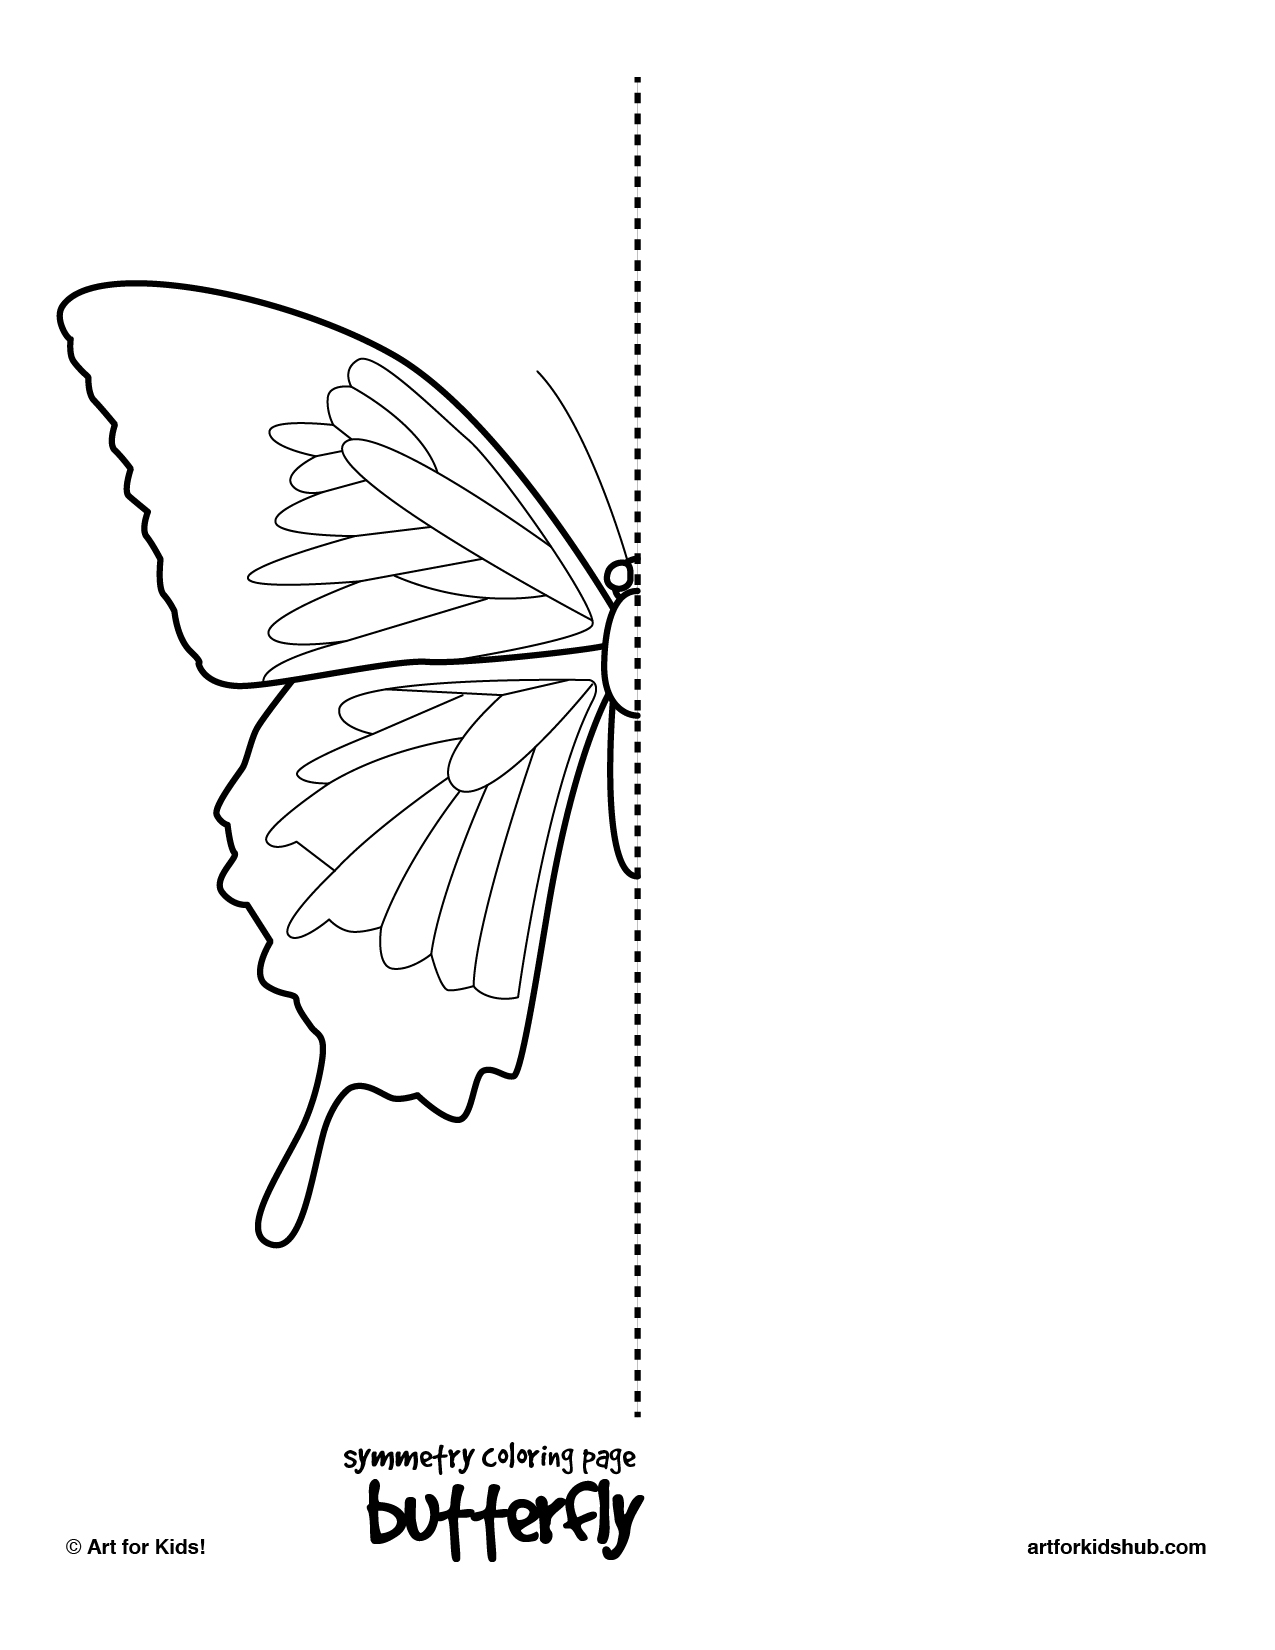 s line of symmetry coloring pages - photo #26